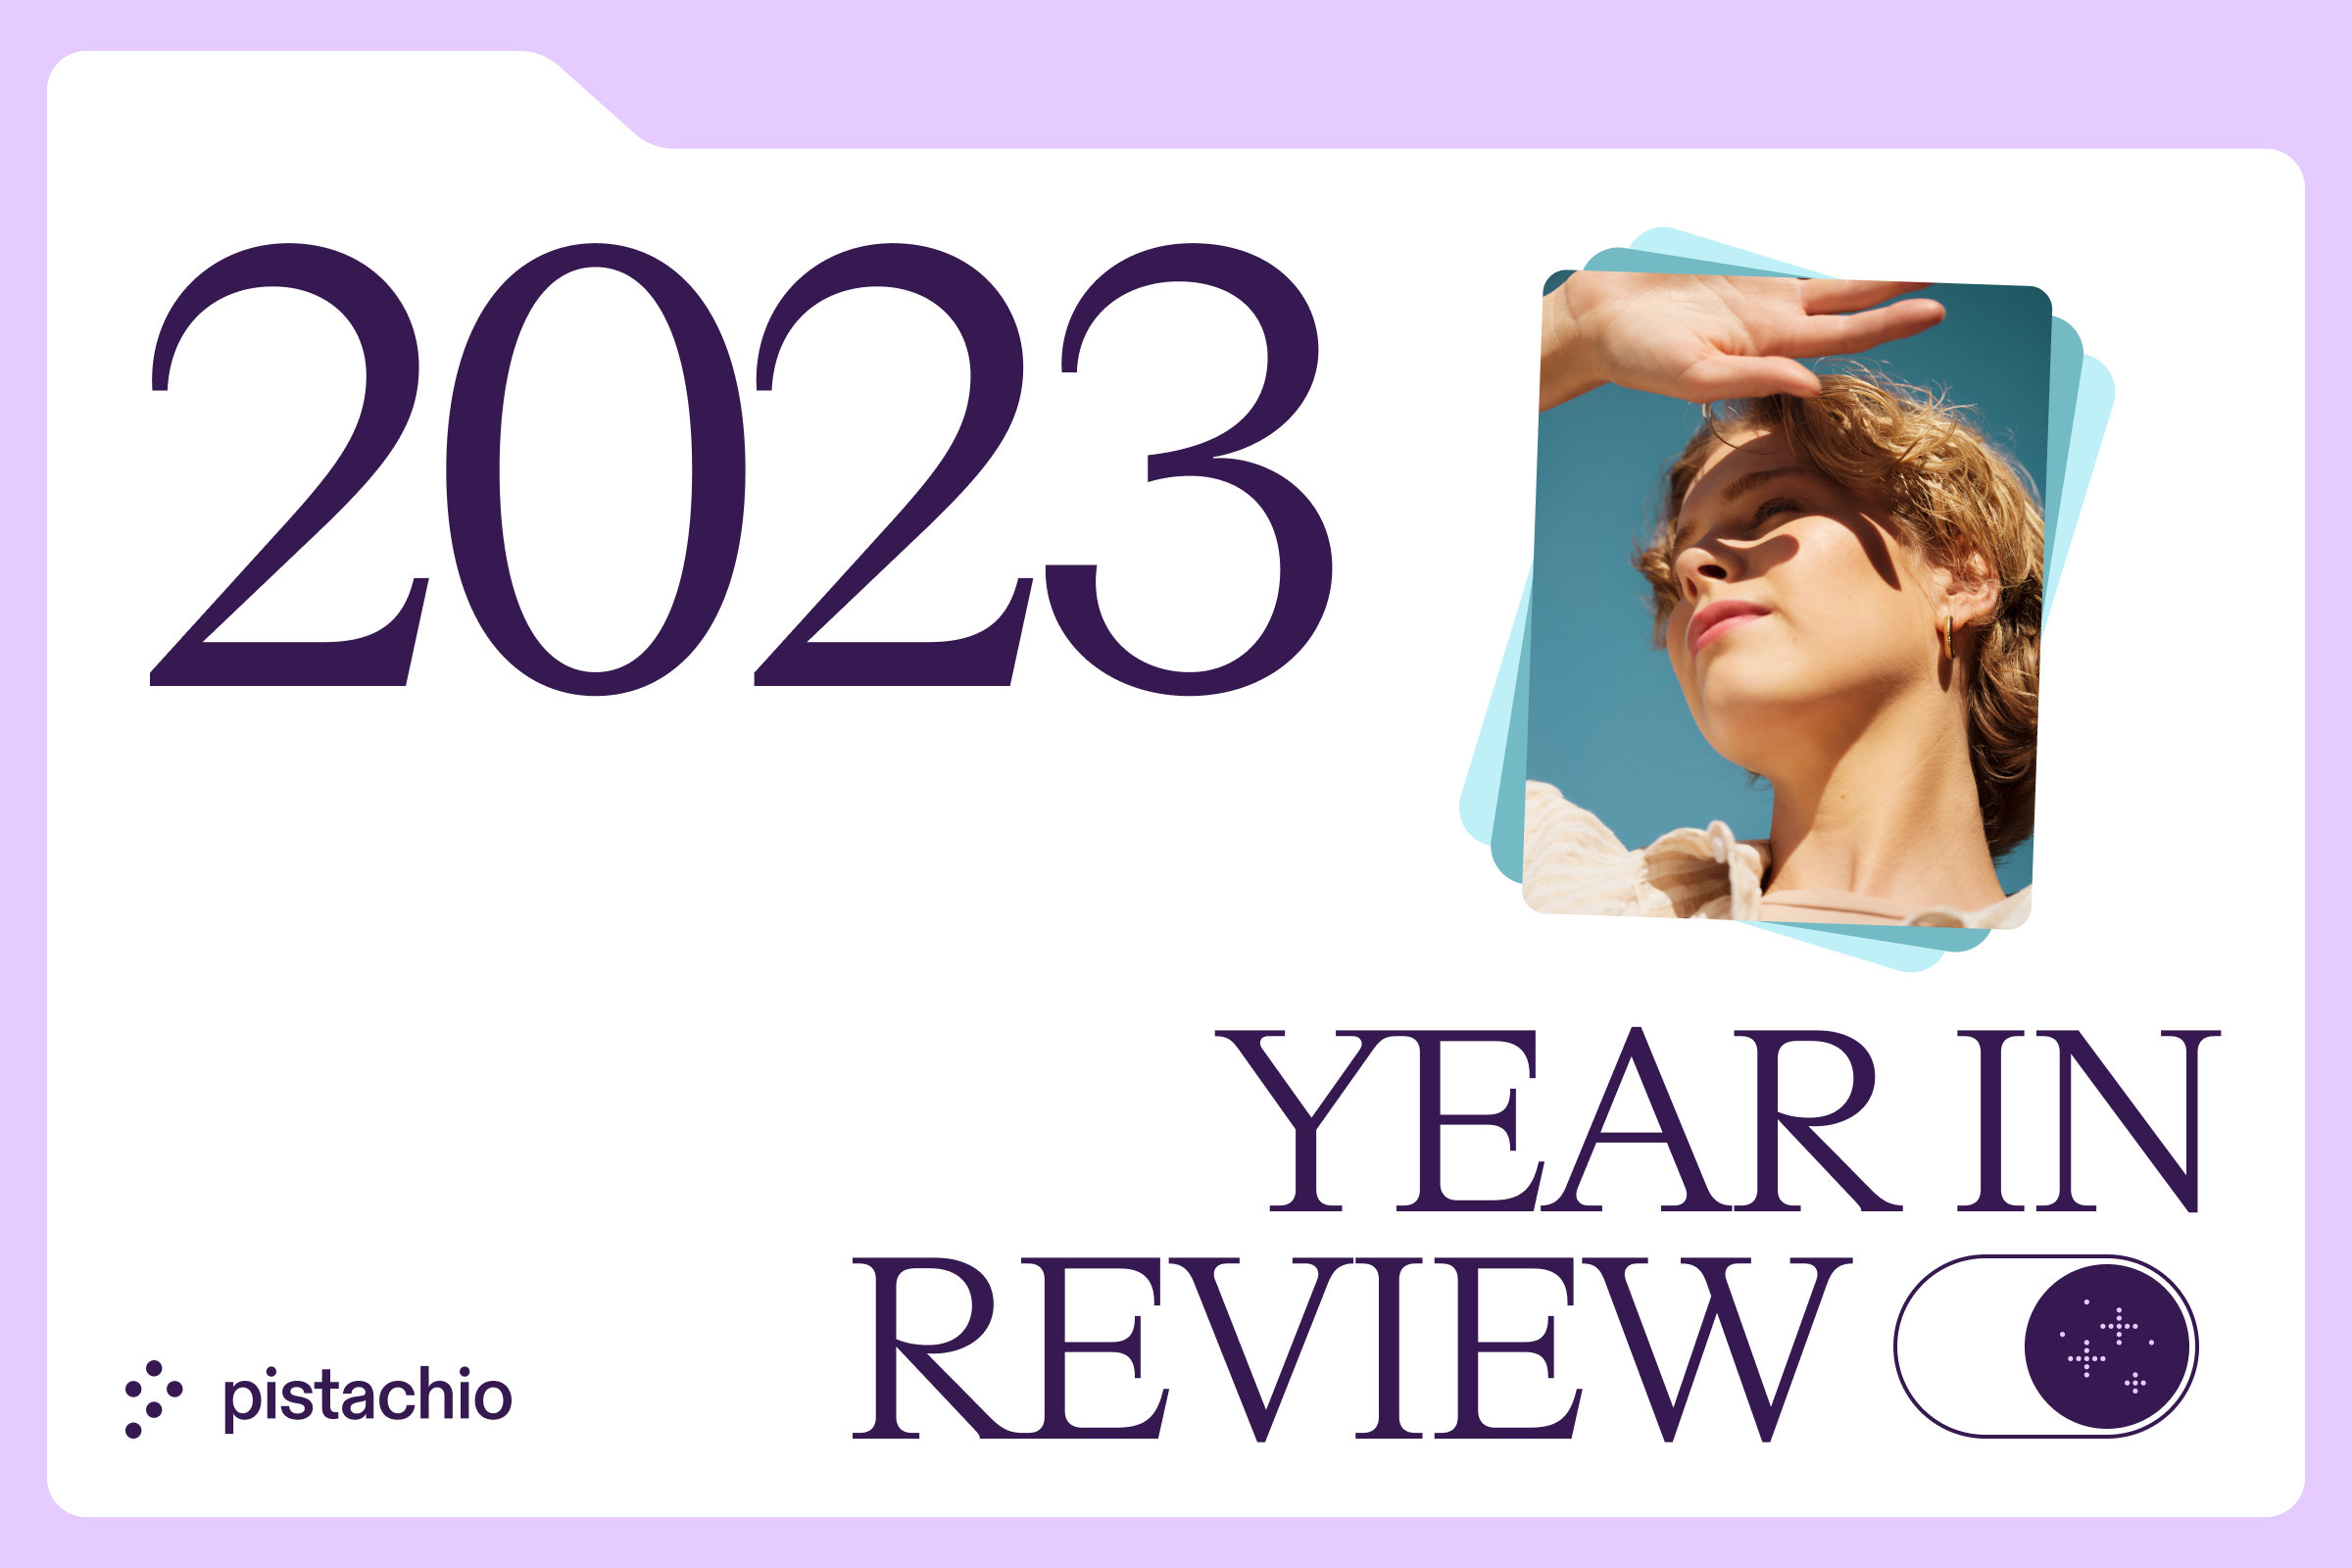 2023 Year in Review Image